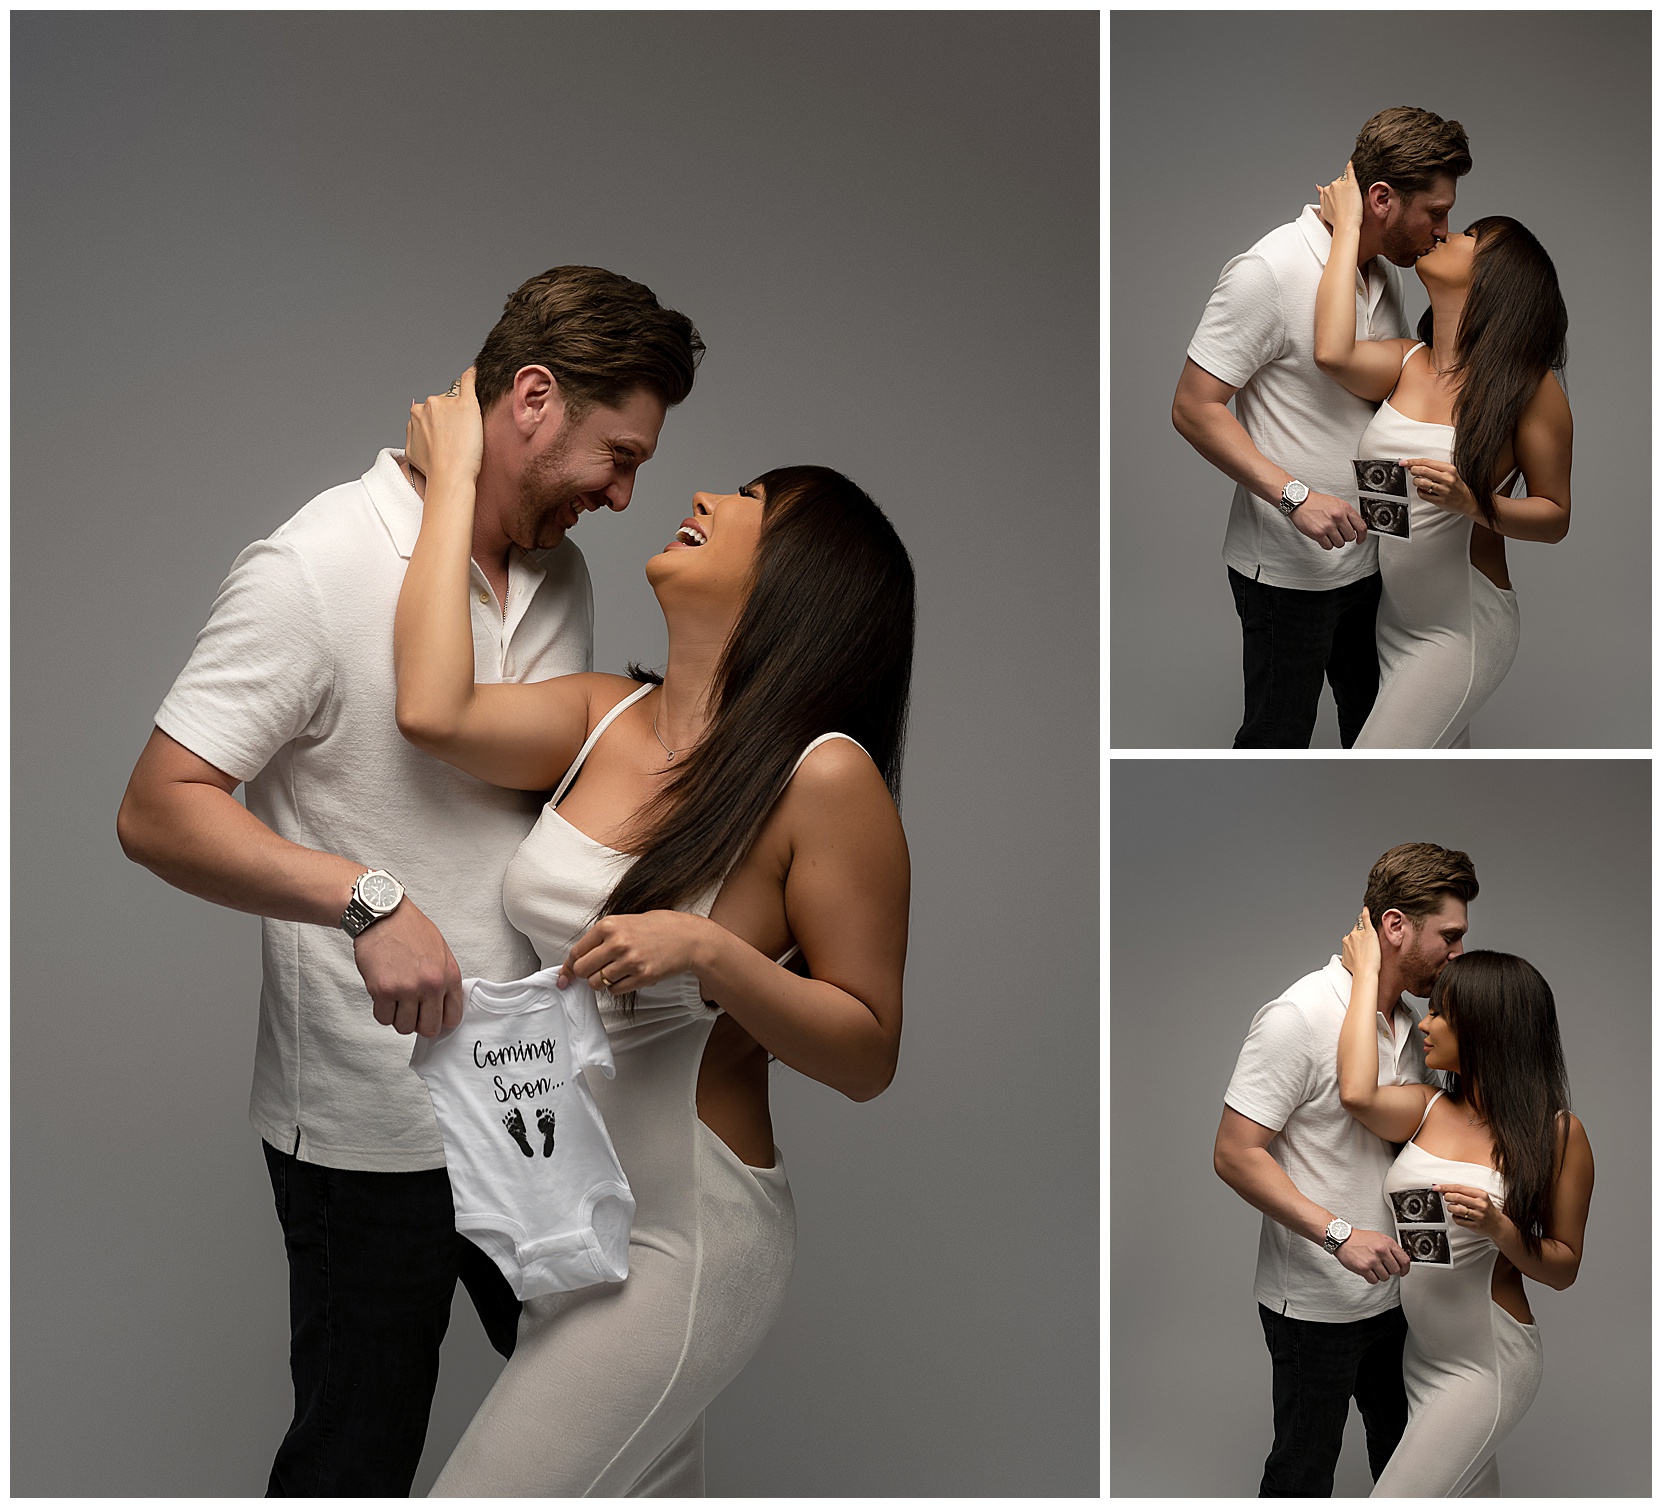 Pregnancy announcement photo montage featuring a woman in a white dress and her male partner